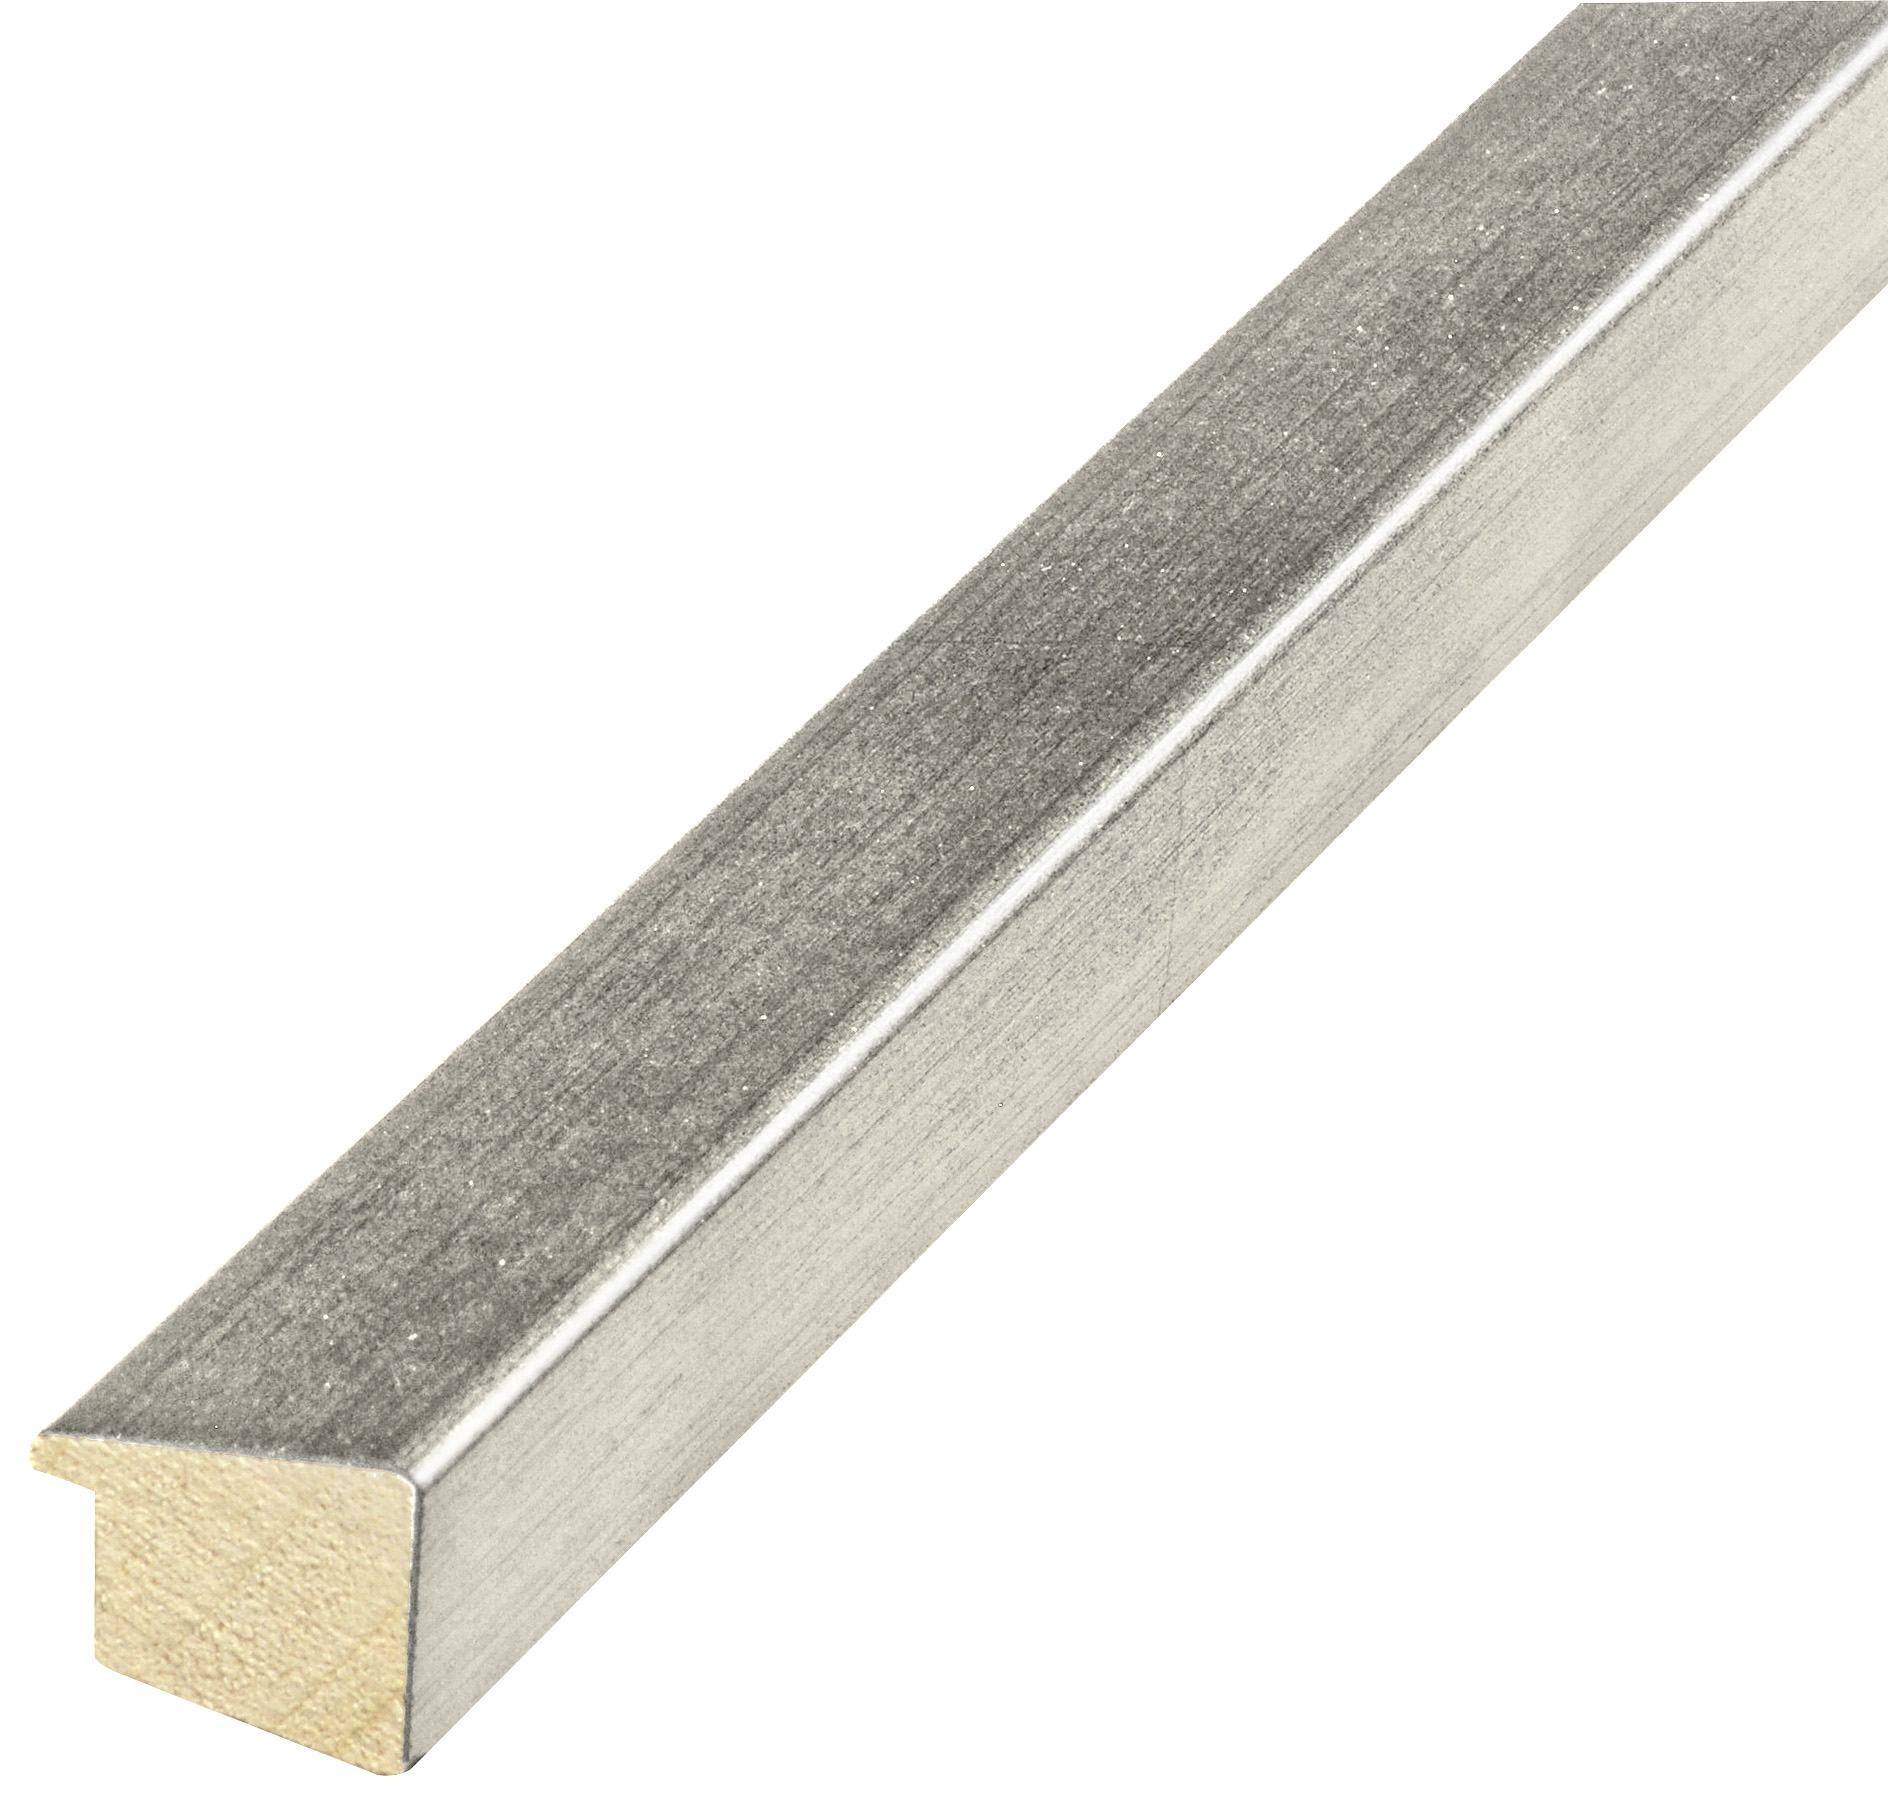 Moulding ayous jointed, width 23mm height 26 - silver finish